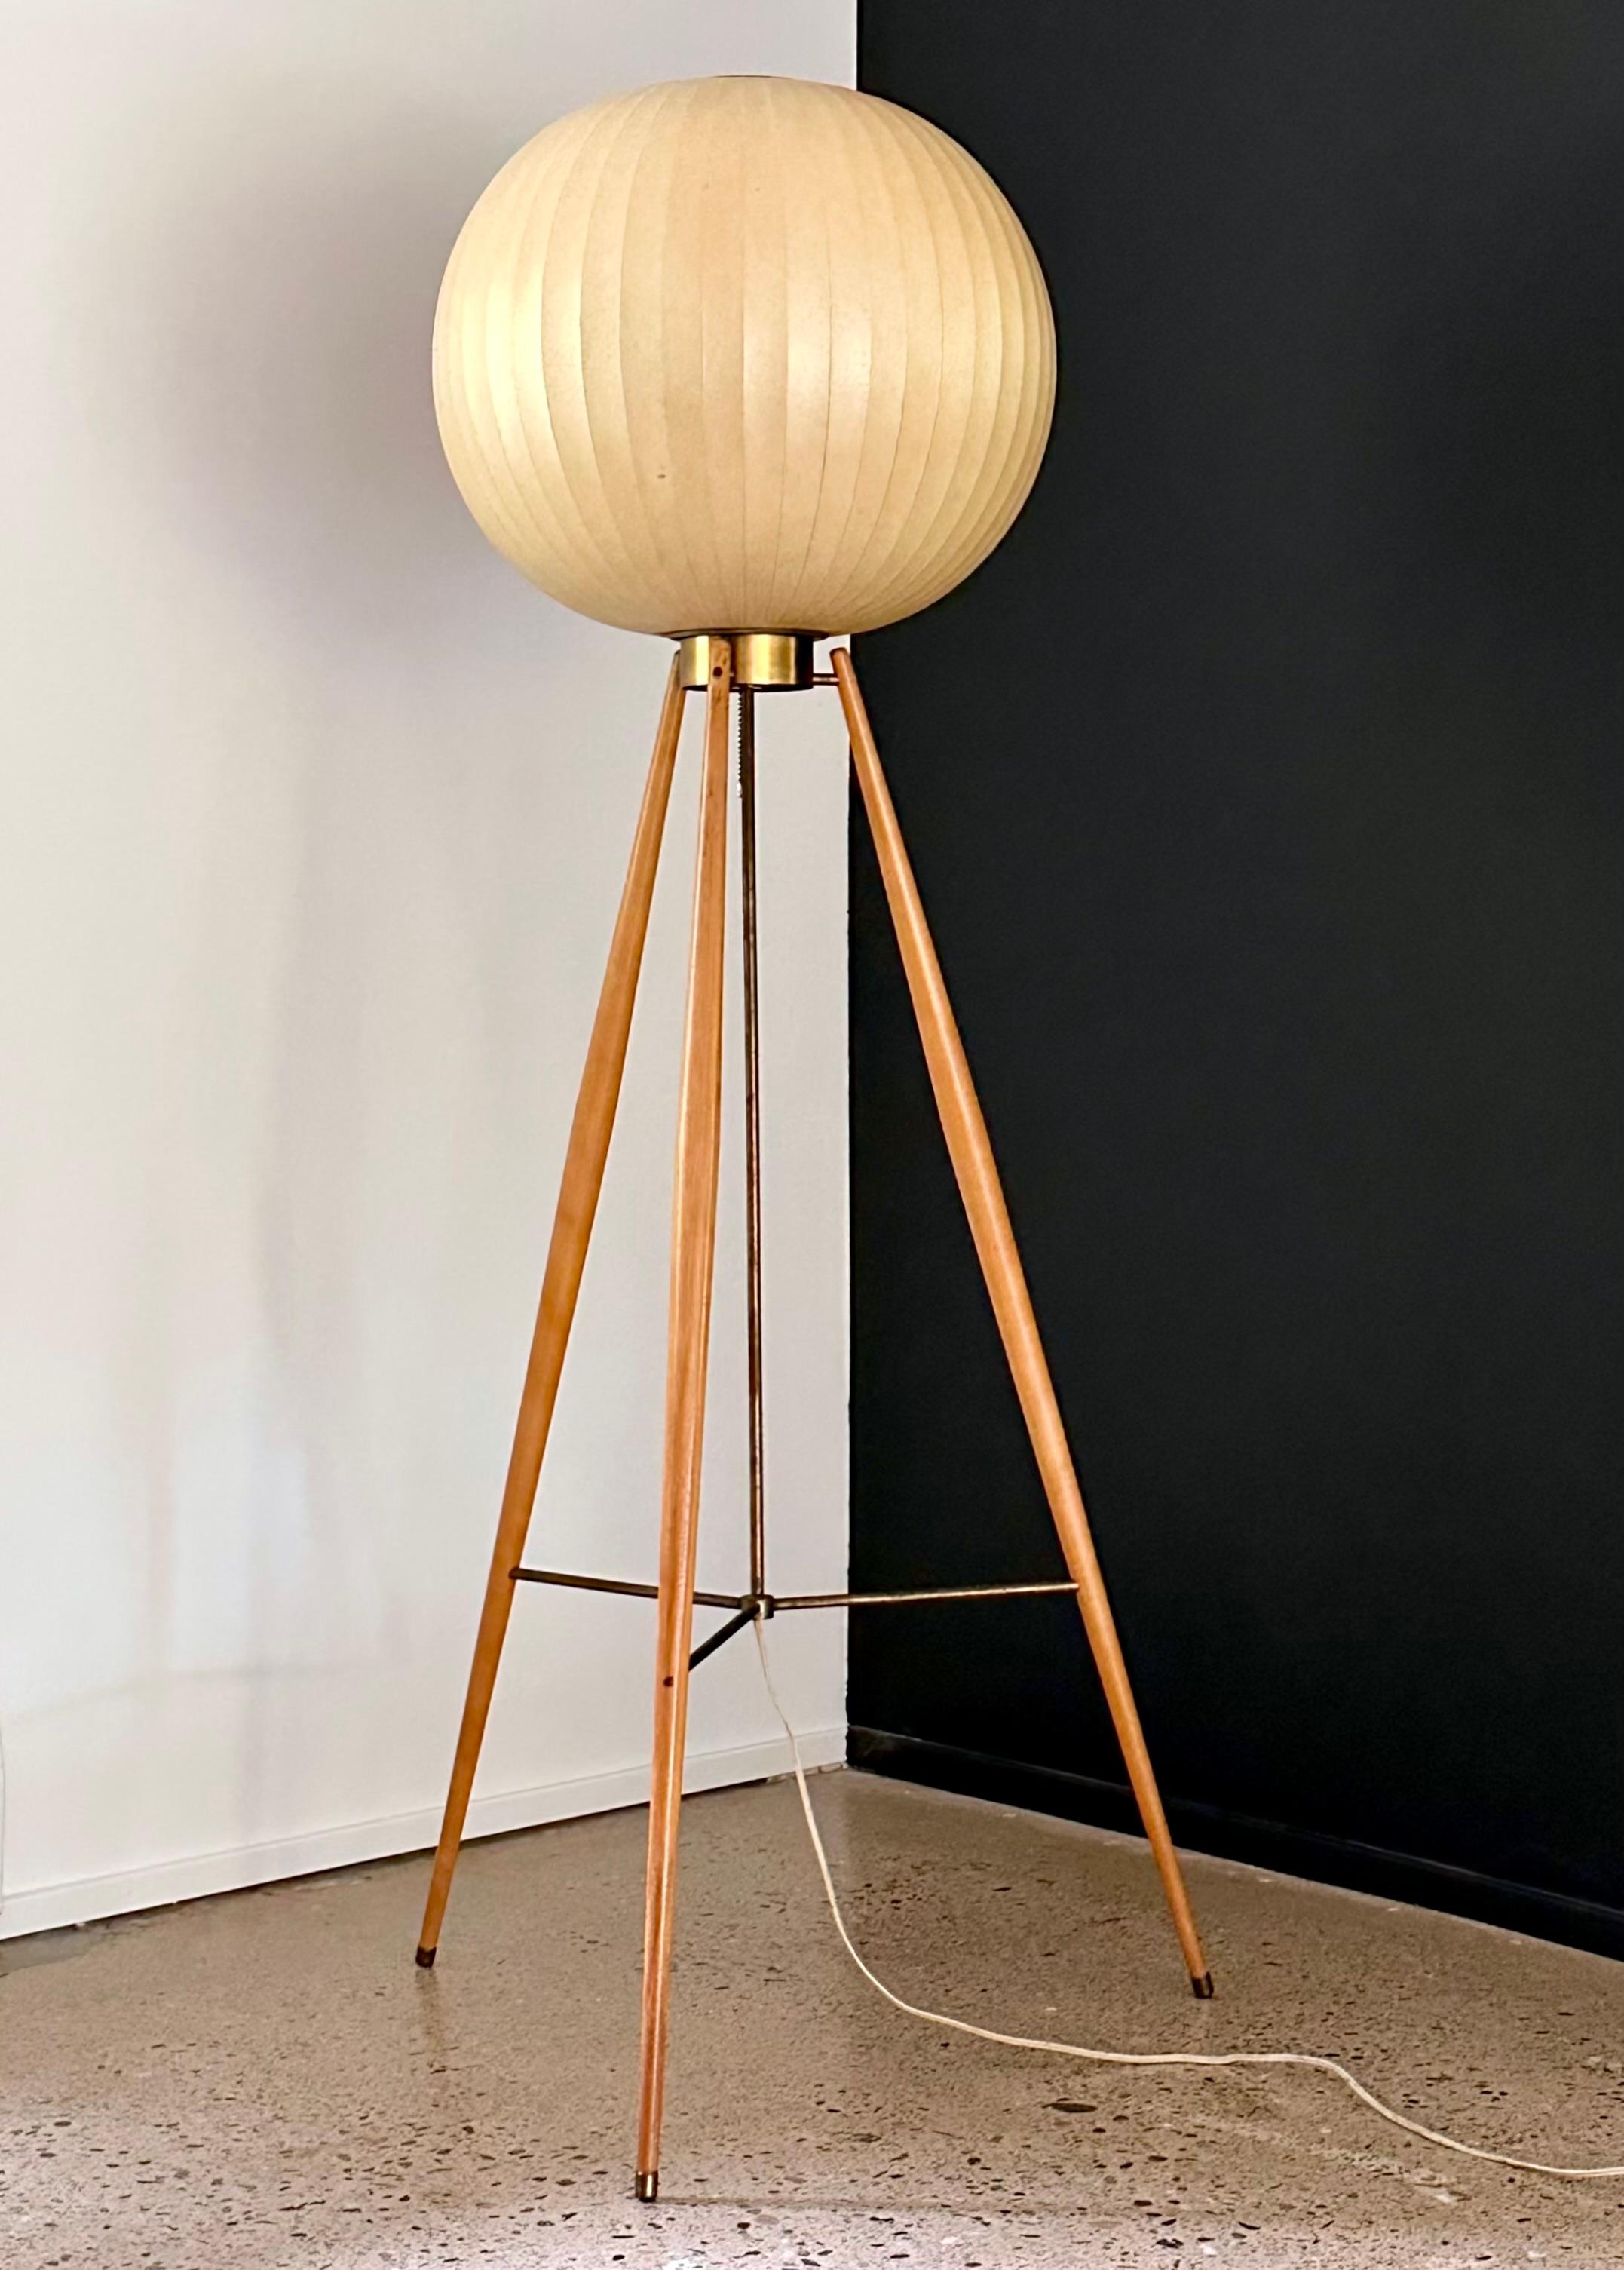 Extremely Rare George Nelson Bubble Floor Lamp Original Birch Tripod Base 1950s For Sale 2